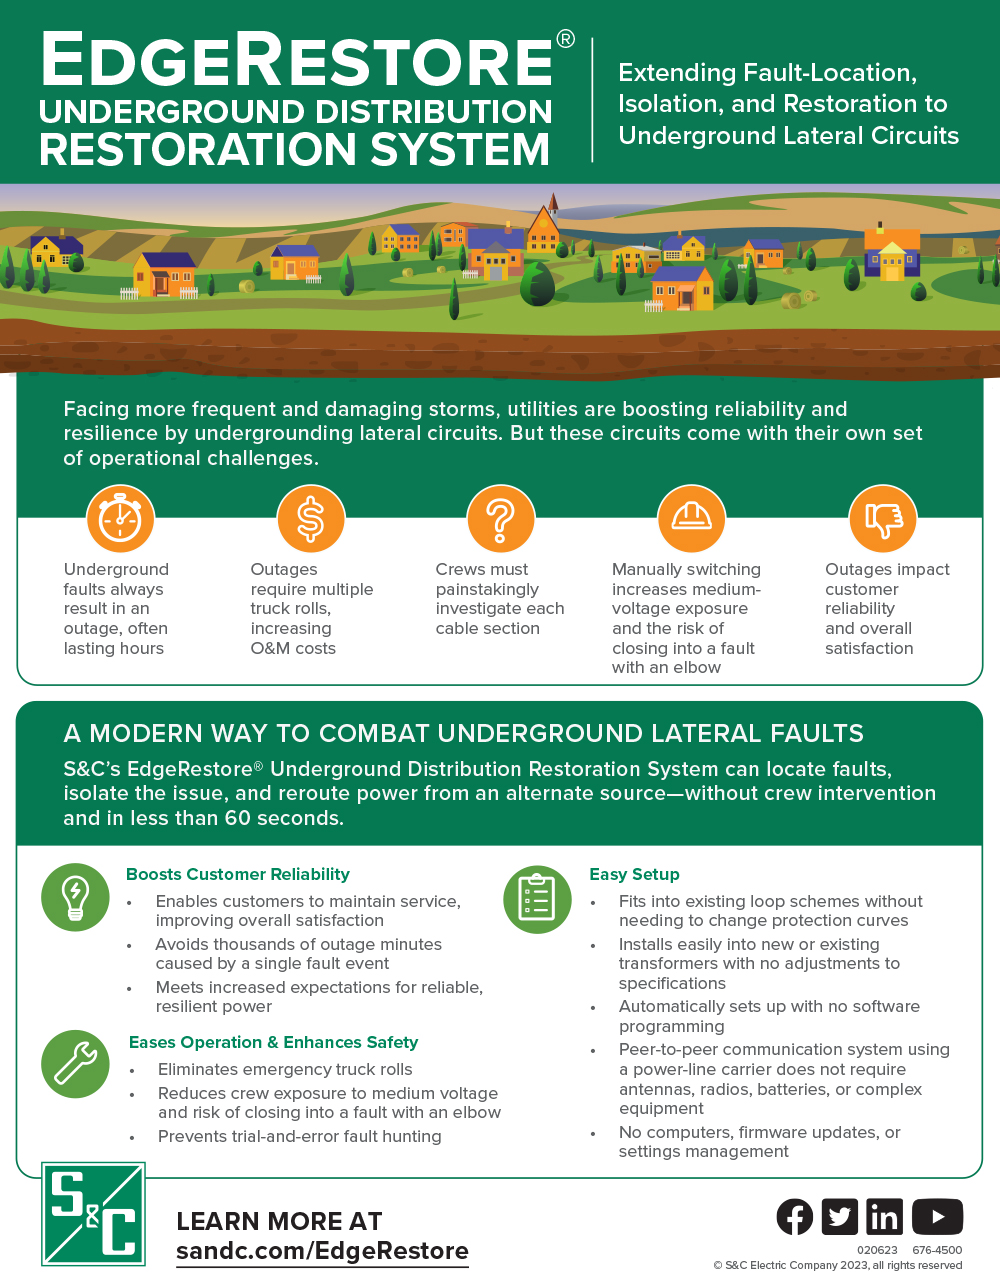 Infographic detailing EdgeRestore's ability to extend fault location isolation and restoration to underground lateral lines